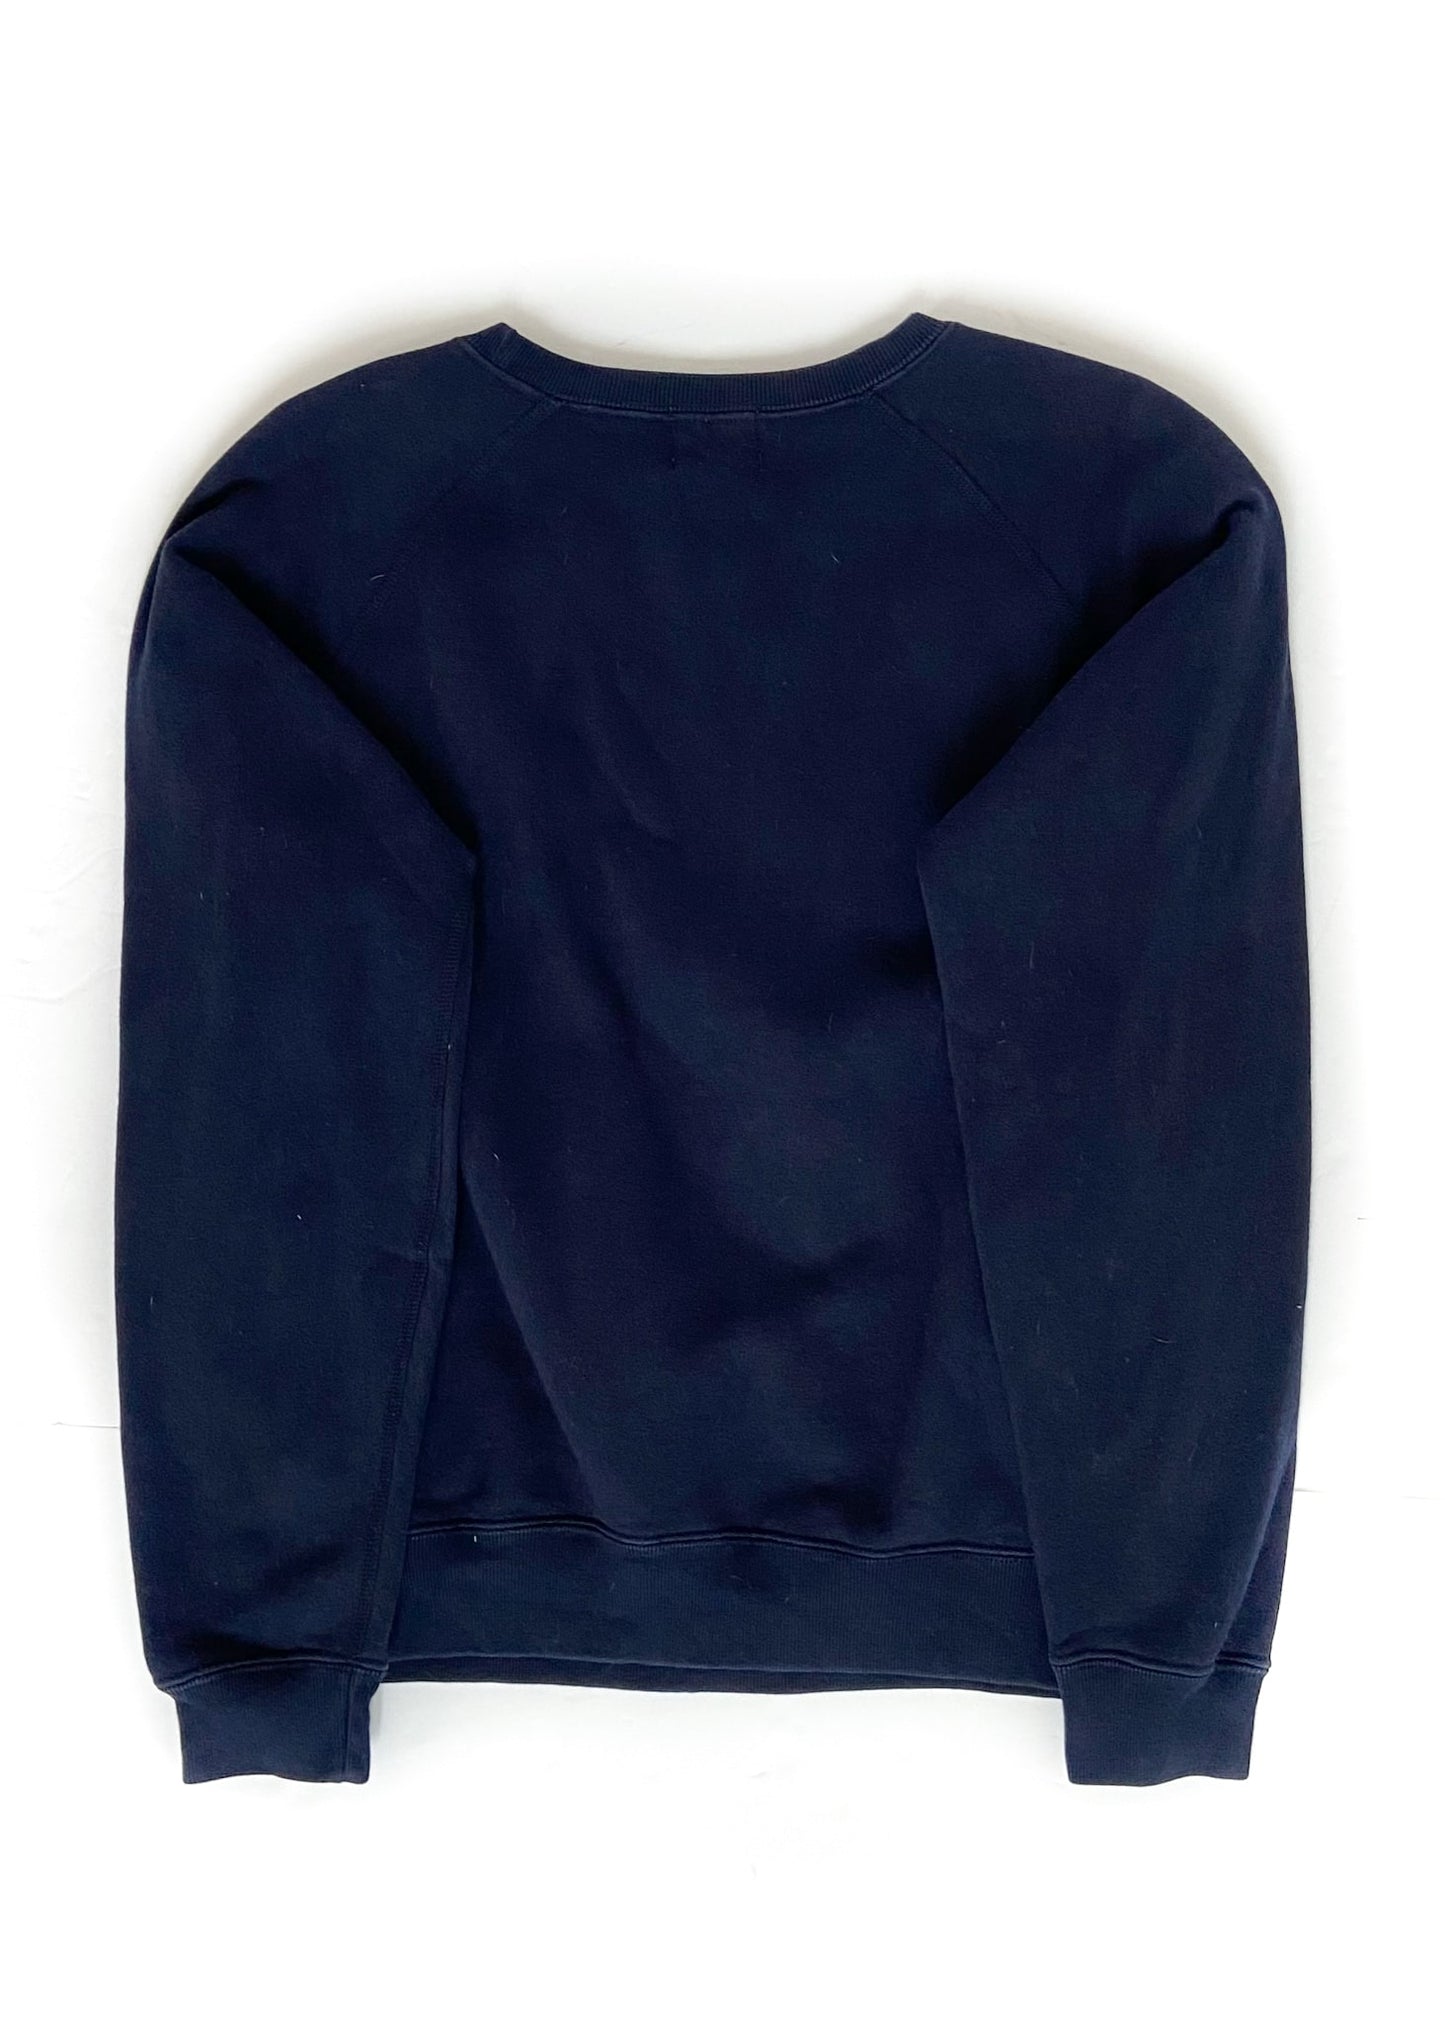 Roots Equestrian Crew Neck Sweater - Navy - Women's Small